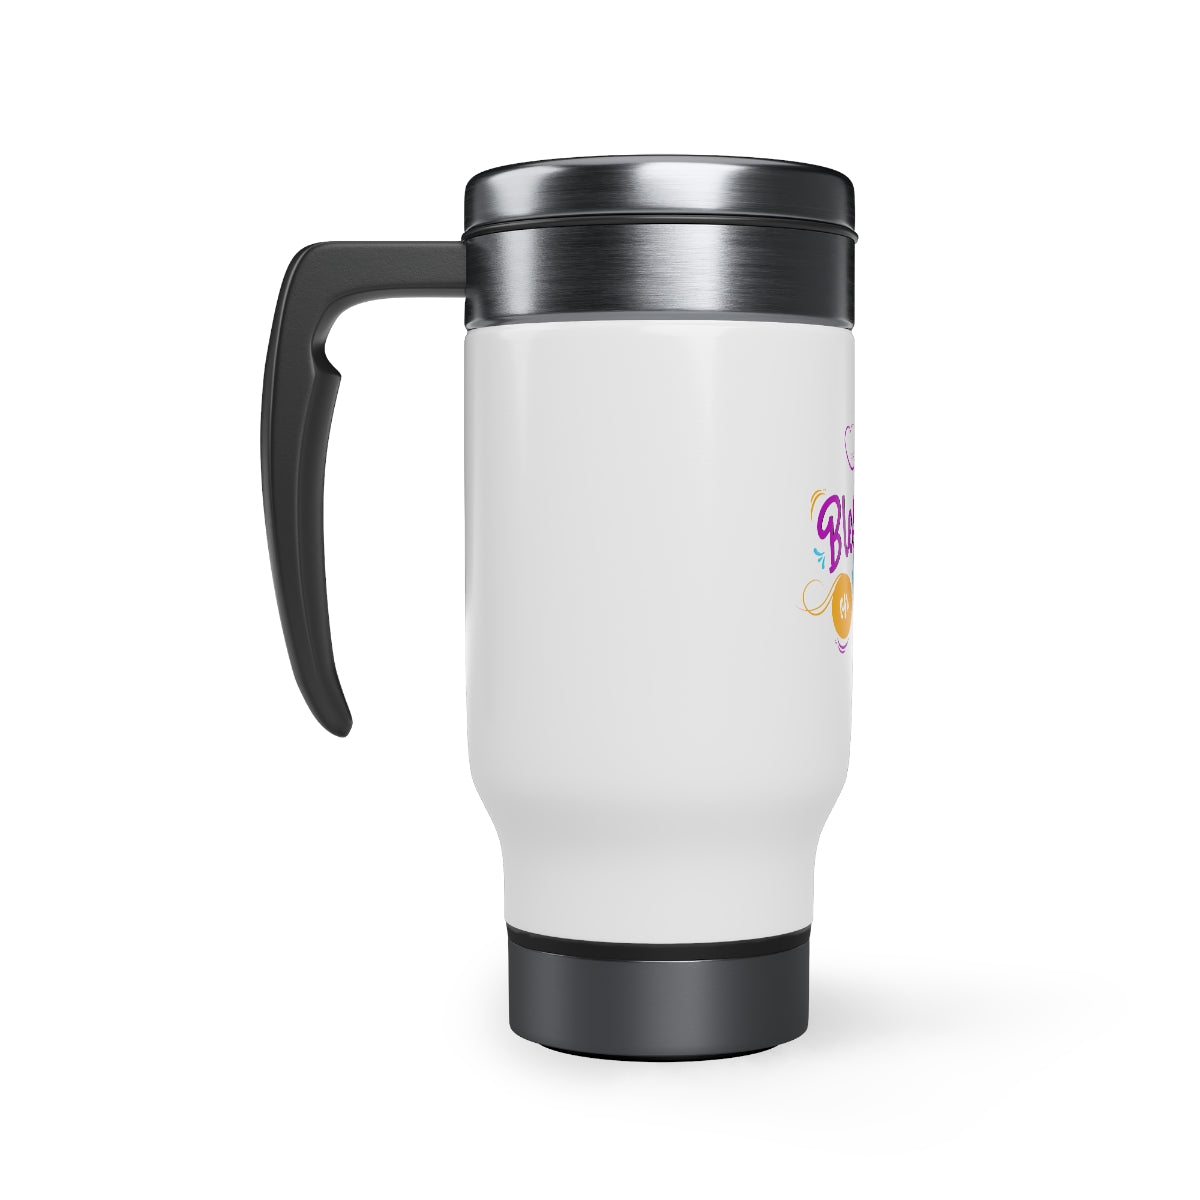 Blessings on Overflow Stainless Steel Travel Mug with Handle, 14oz Printify